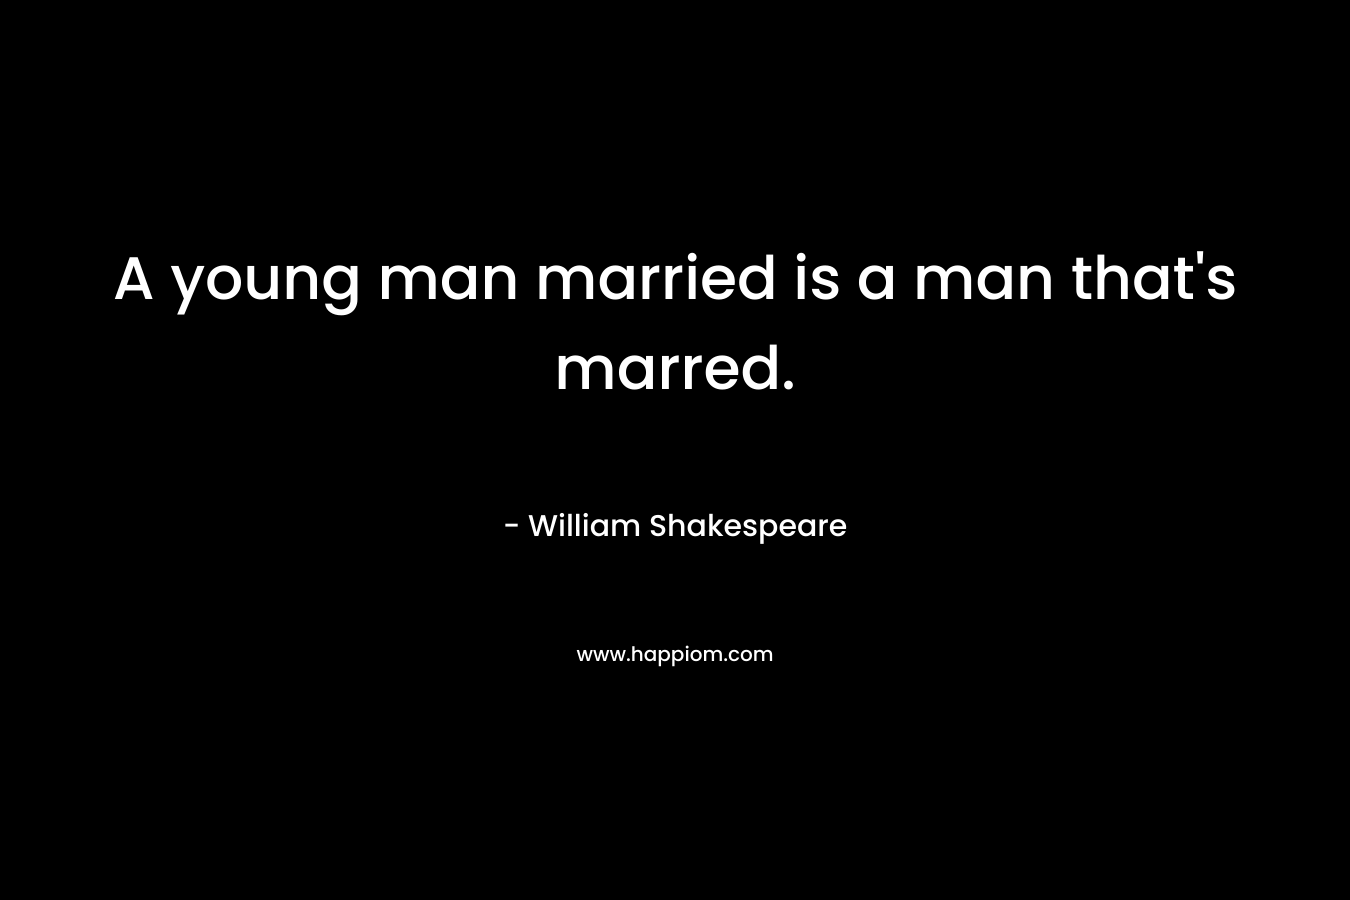 A young man married is a man that's marred.